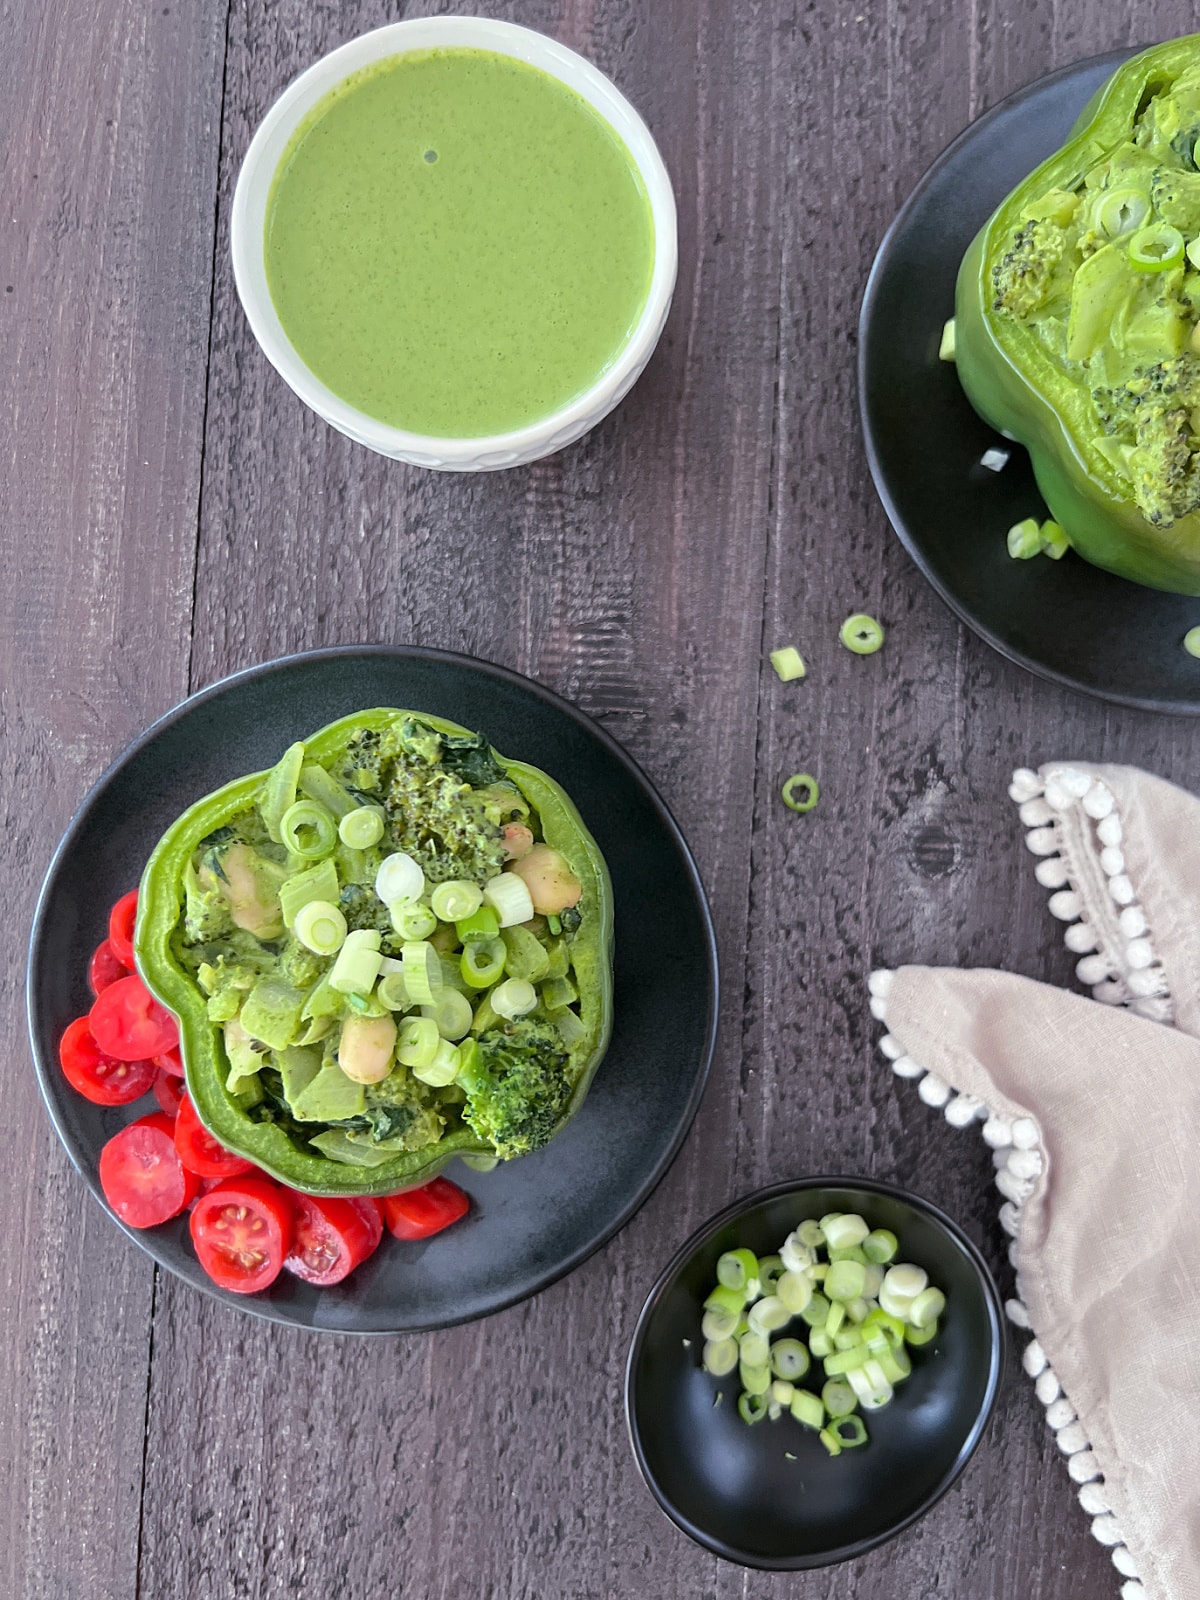 Overhead view of two green bell peppers standing on matte black plates, tops sliced off and stuffed with a green goddess mixture of beans, broccoli, onion, riced palm hearts, and green goddess sauce. One plate is garnished with sliced red cherry tomatoes.